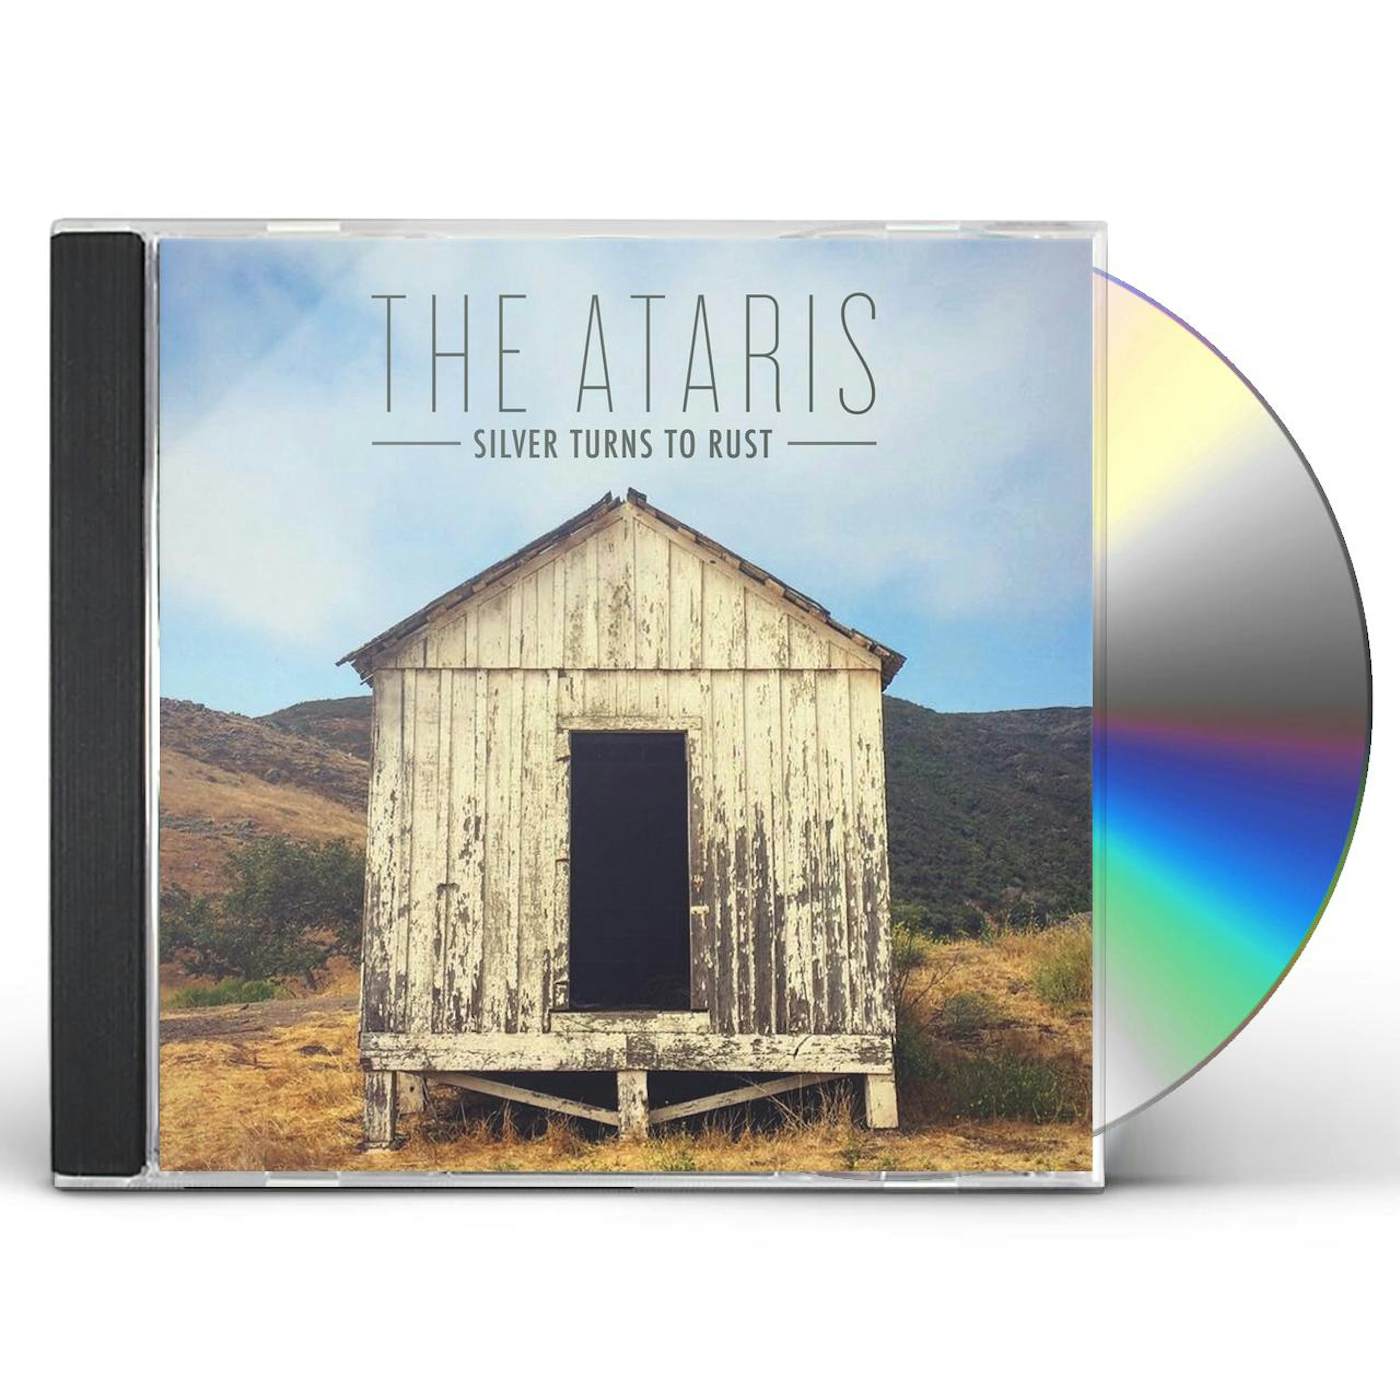 The Ataris SILVER TURNS TO RUST CD